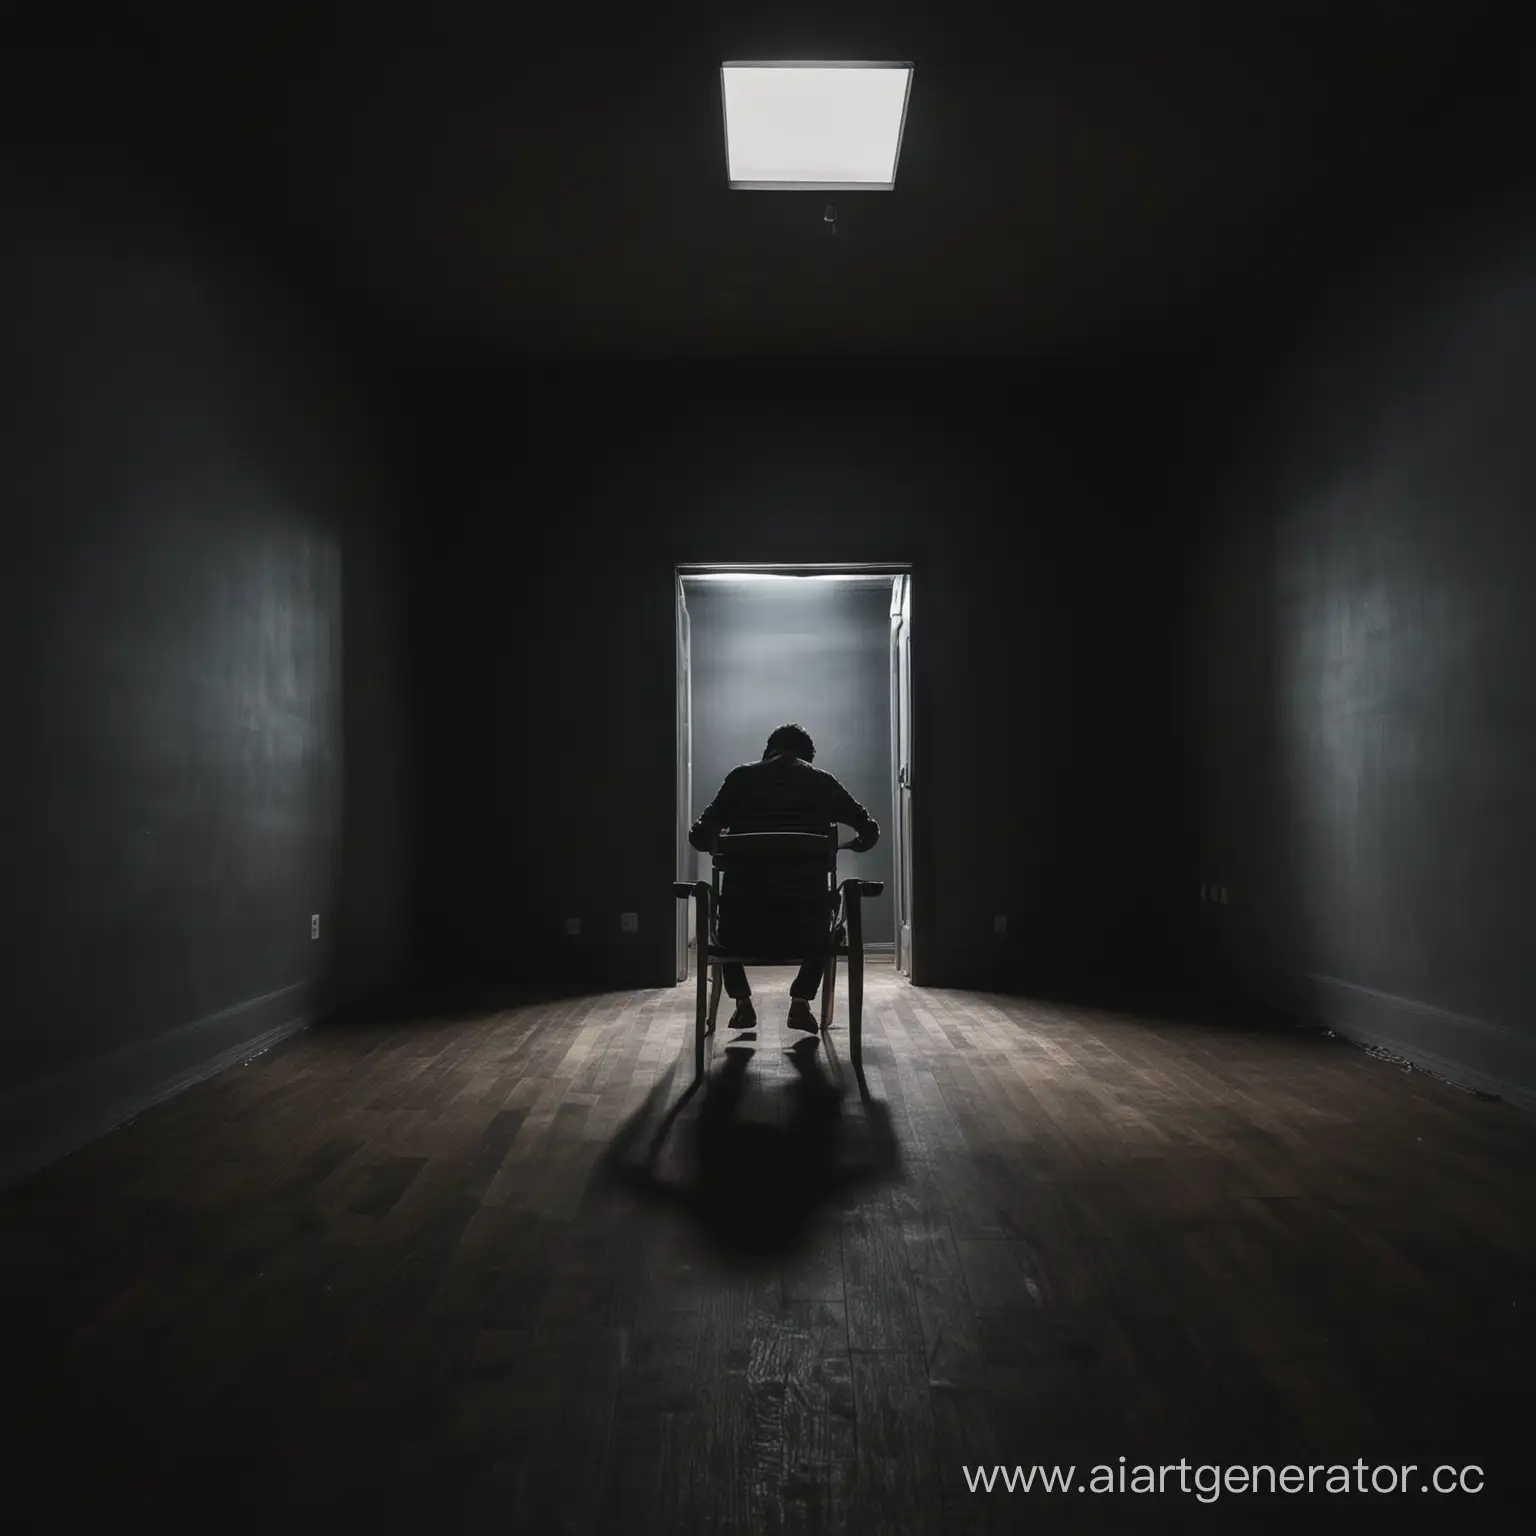 Isolated-Figure-in-a-Dimly-Lit-Room